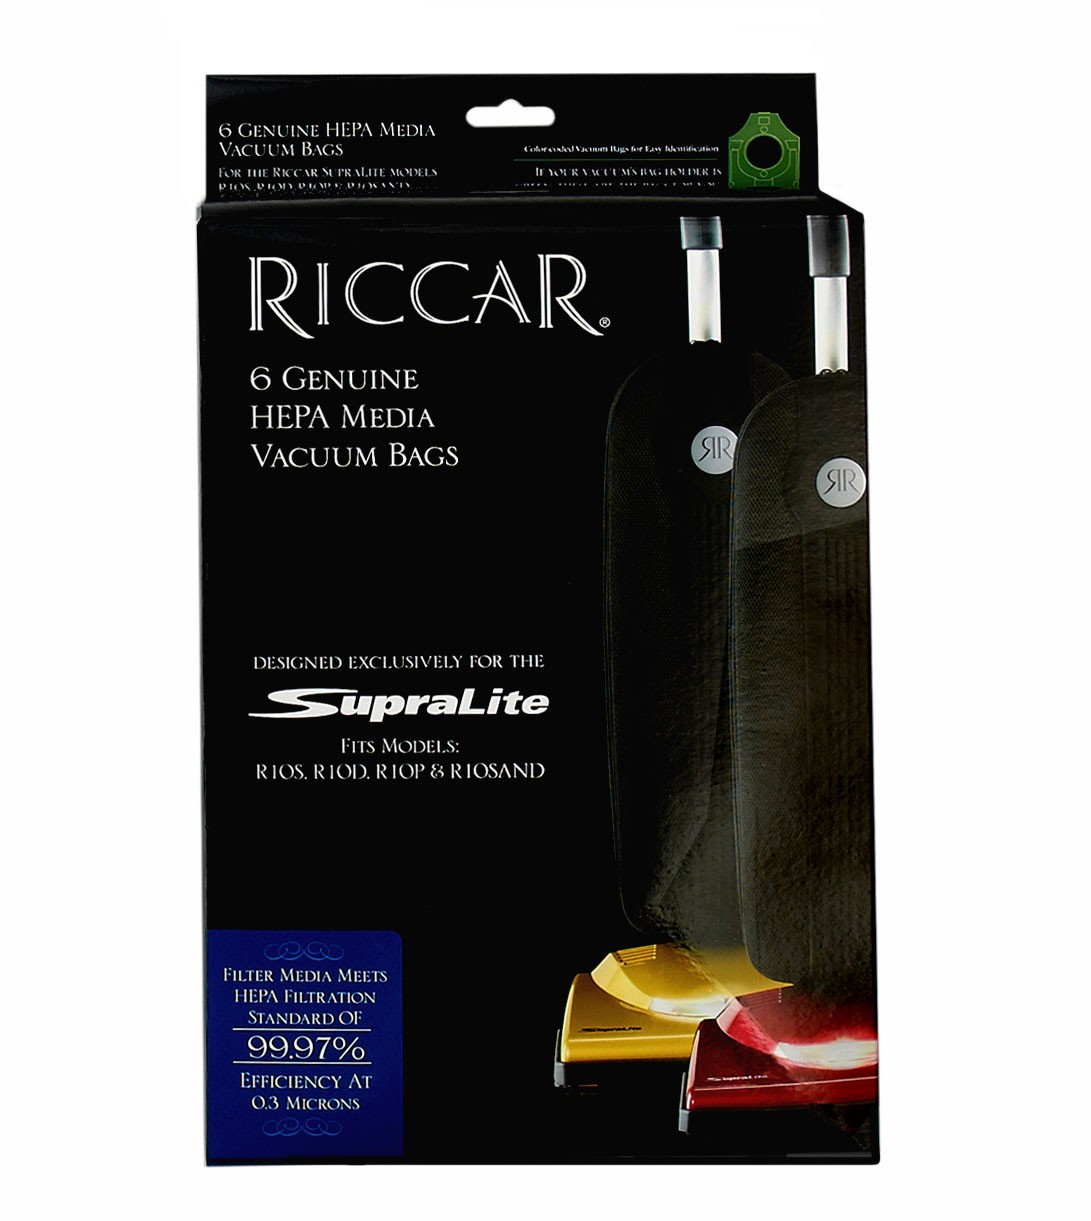 https://statevacuum.com/wp-content/uploads/2017/07/products-riccar_l_bags_for_upright_vacuums_rlh-6.jpg